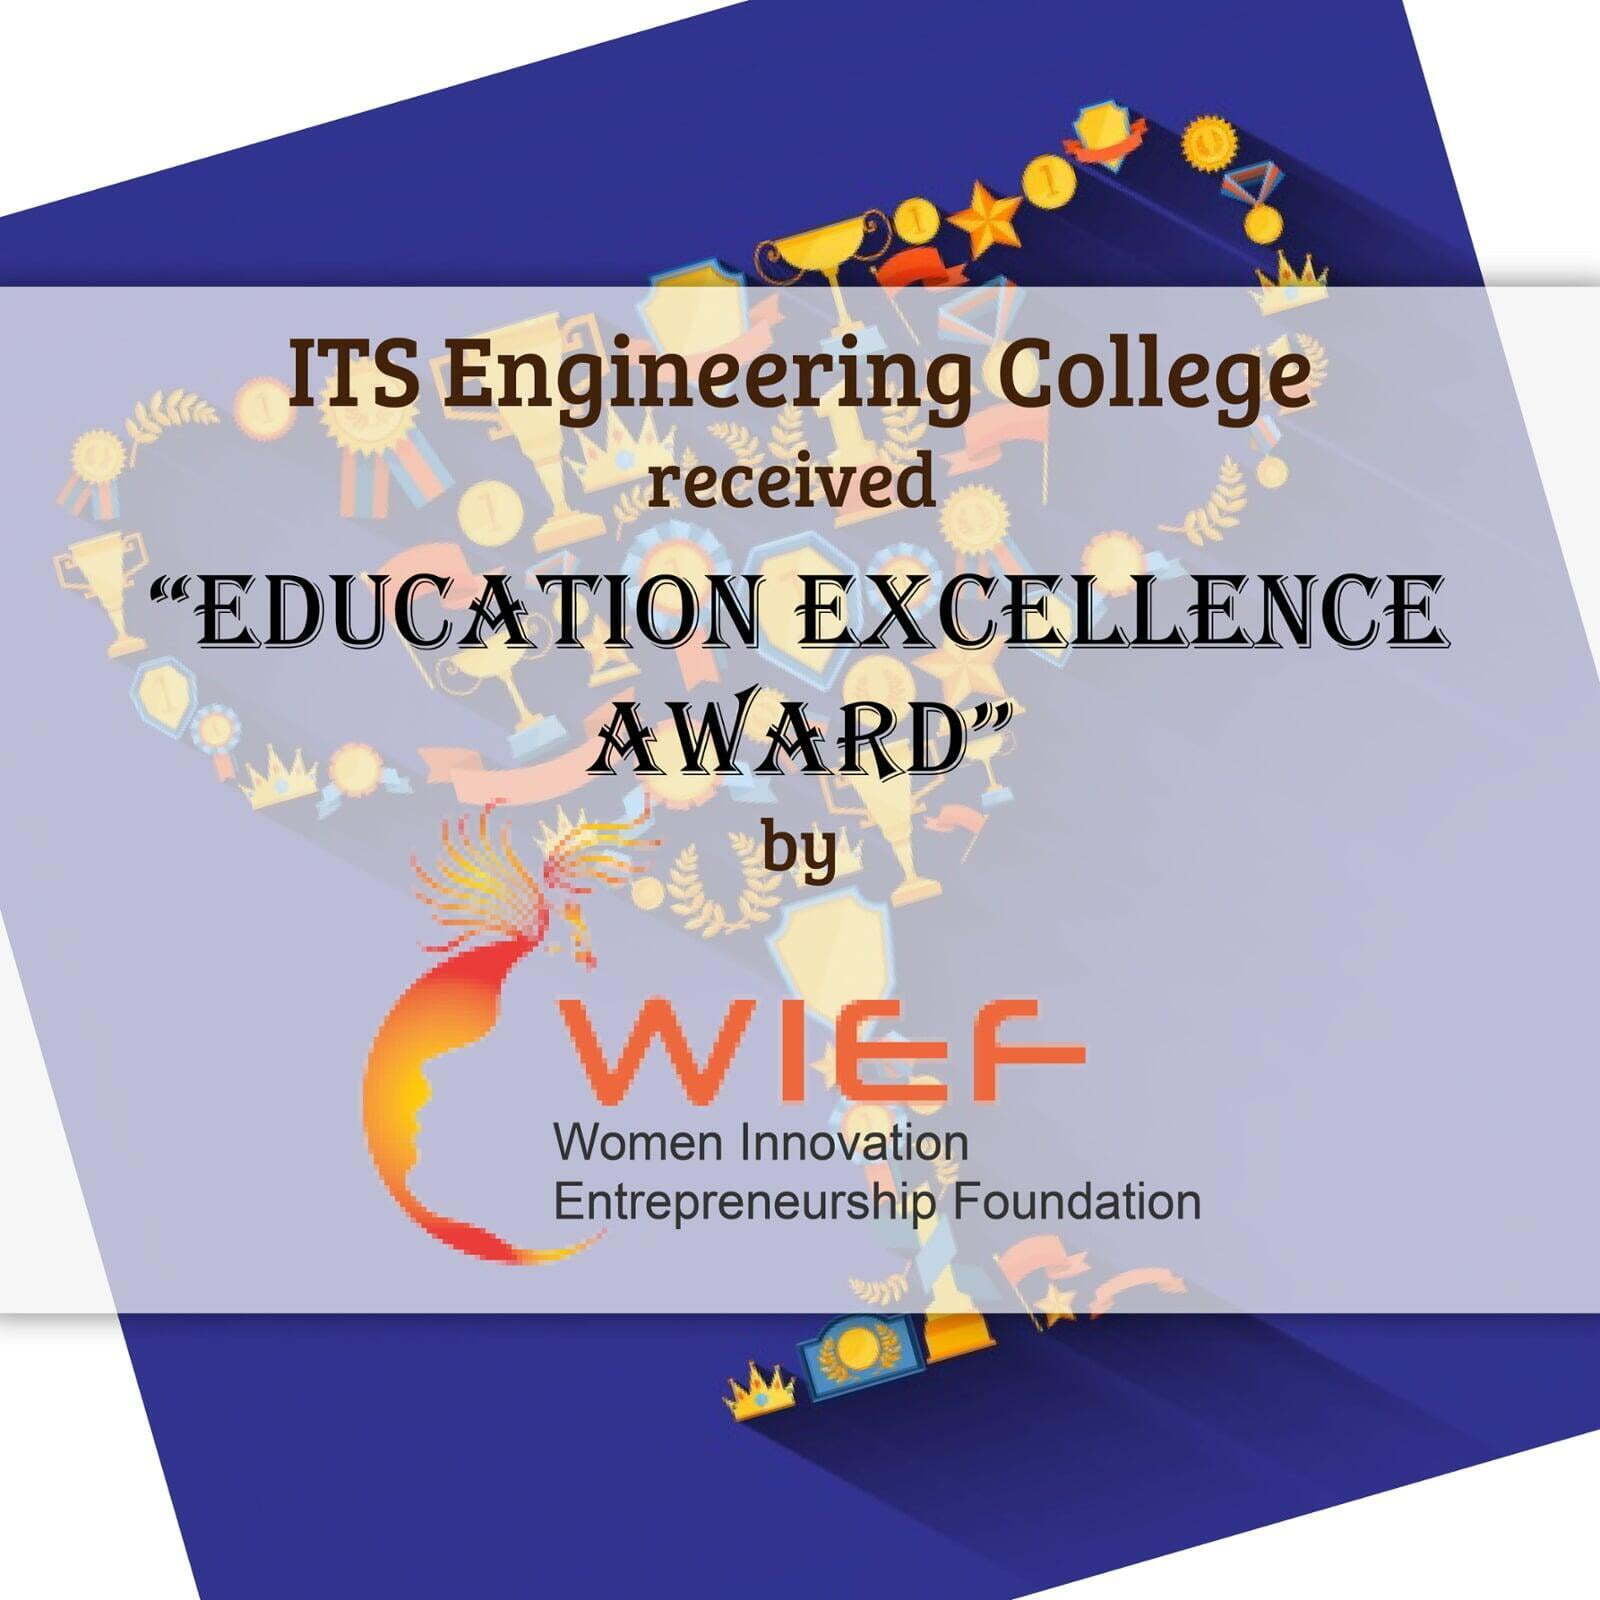 Education Excellence Award by WIEF